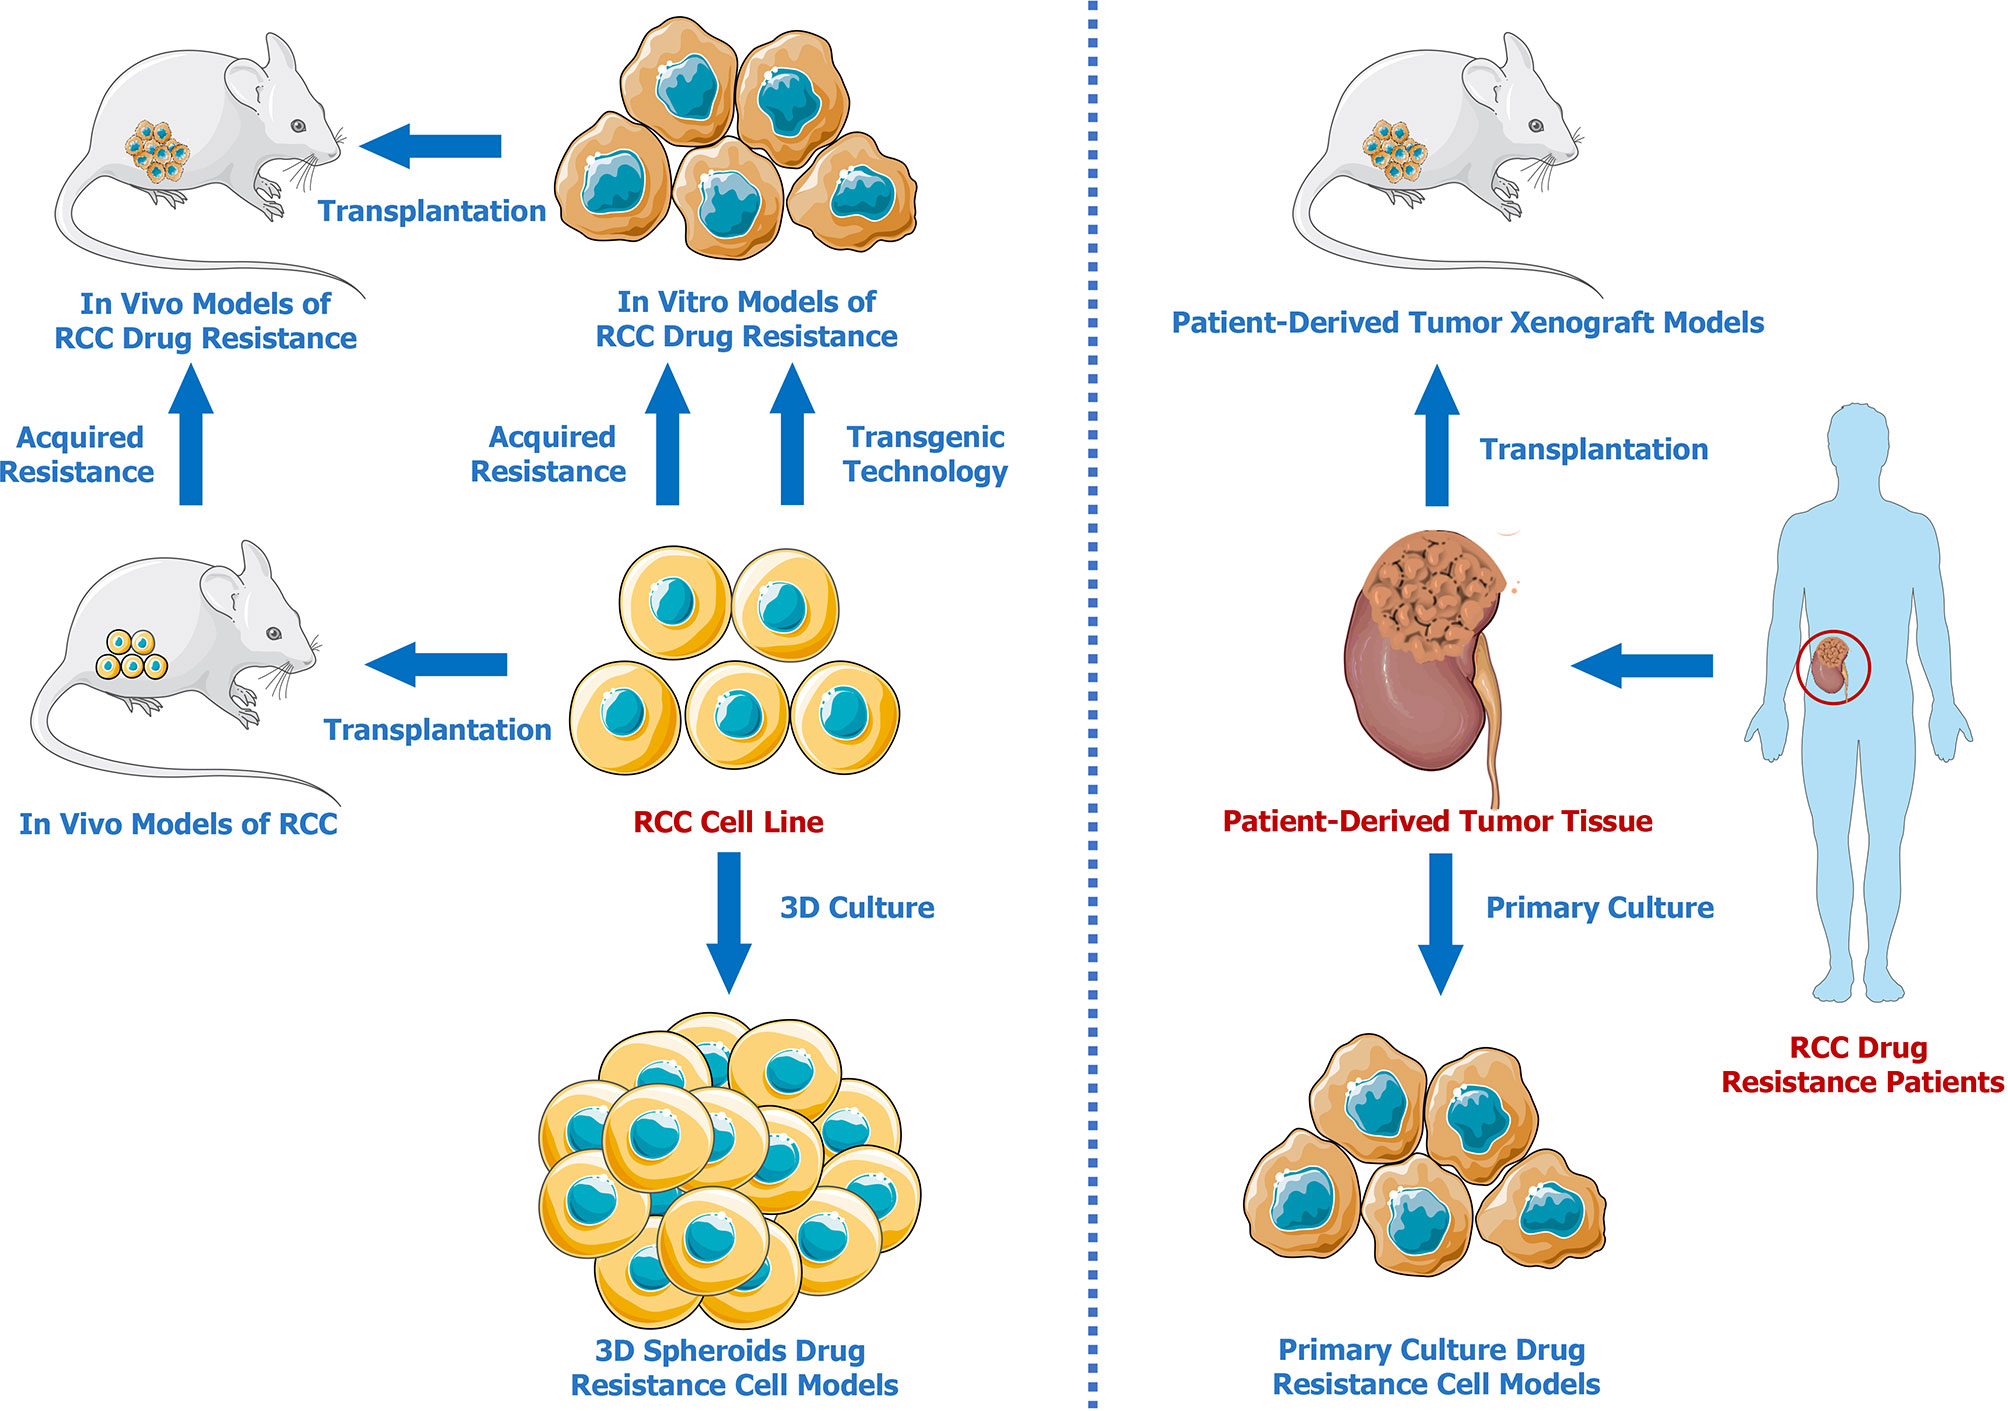 Frontiers | Advances in Renal Cell Carcinoma Drug Resistance Models